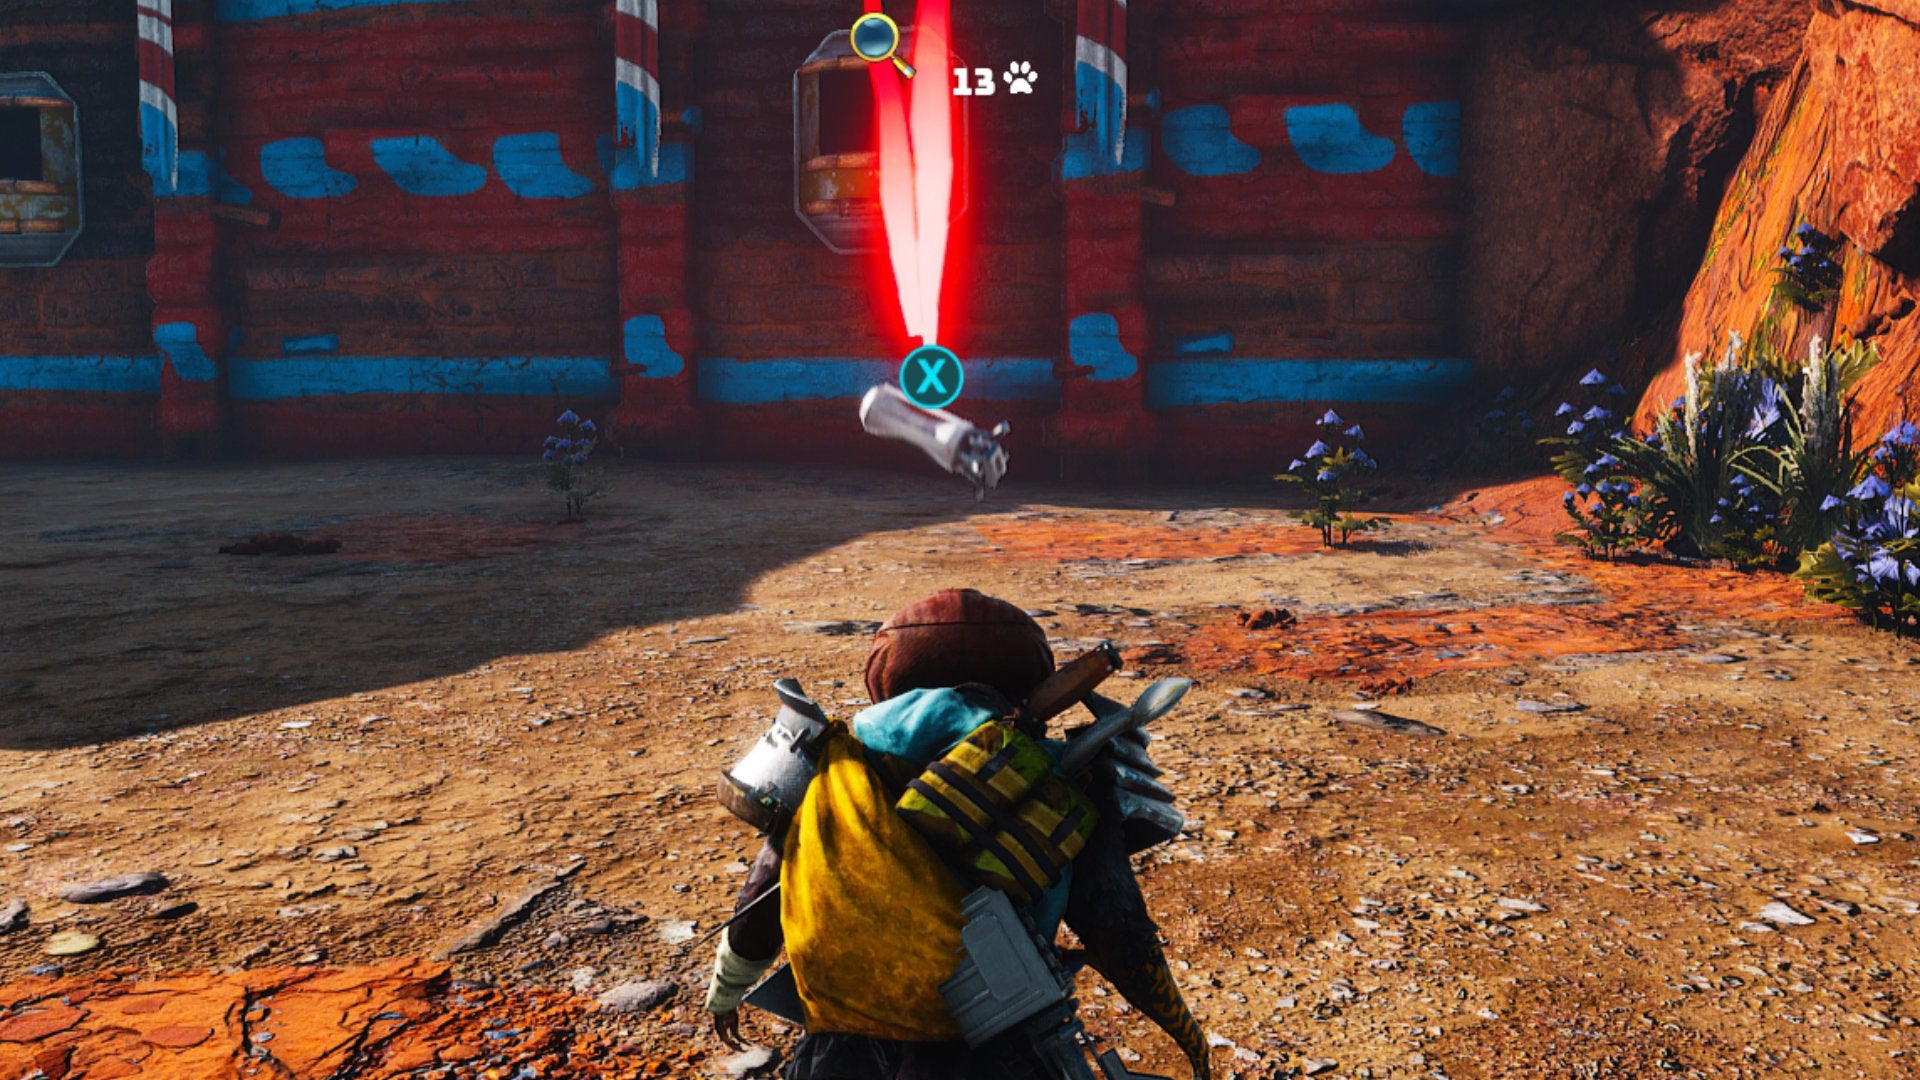 A Biomutant screenshot of a boomhut in an outpost firing a grenade at the player.